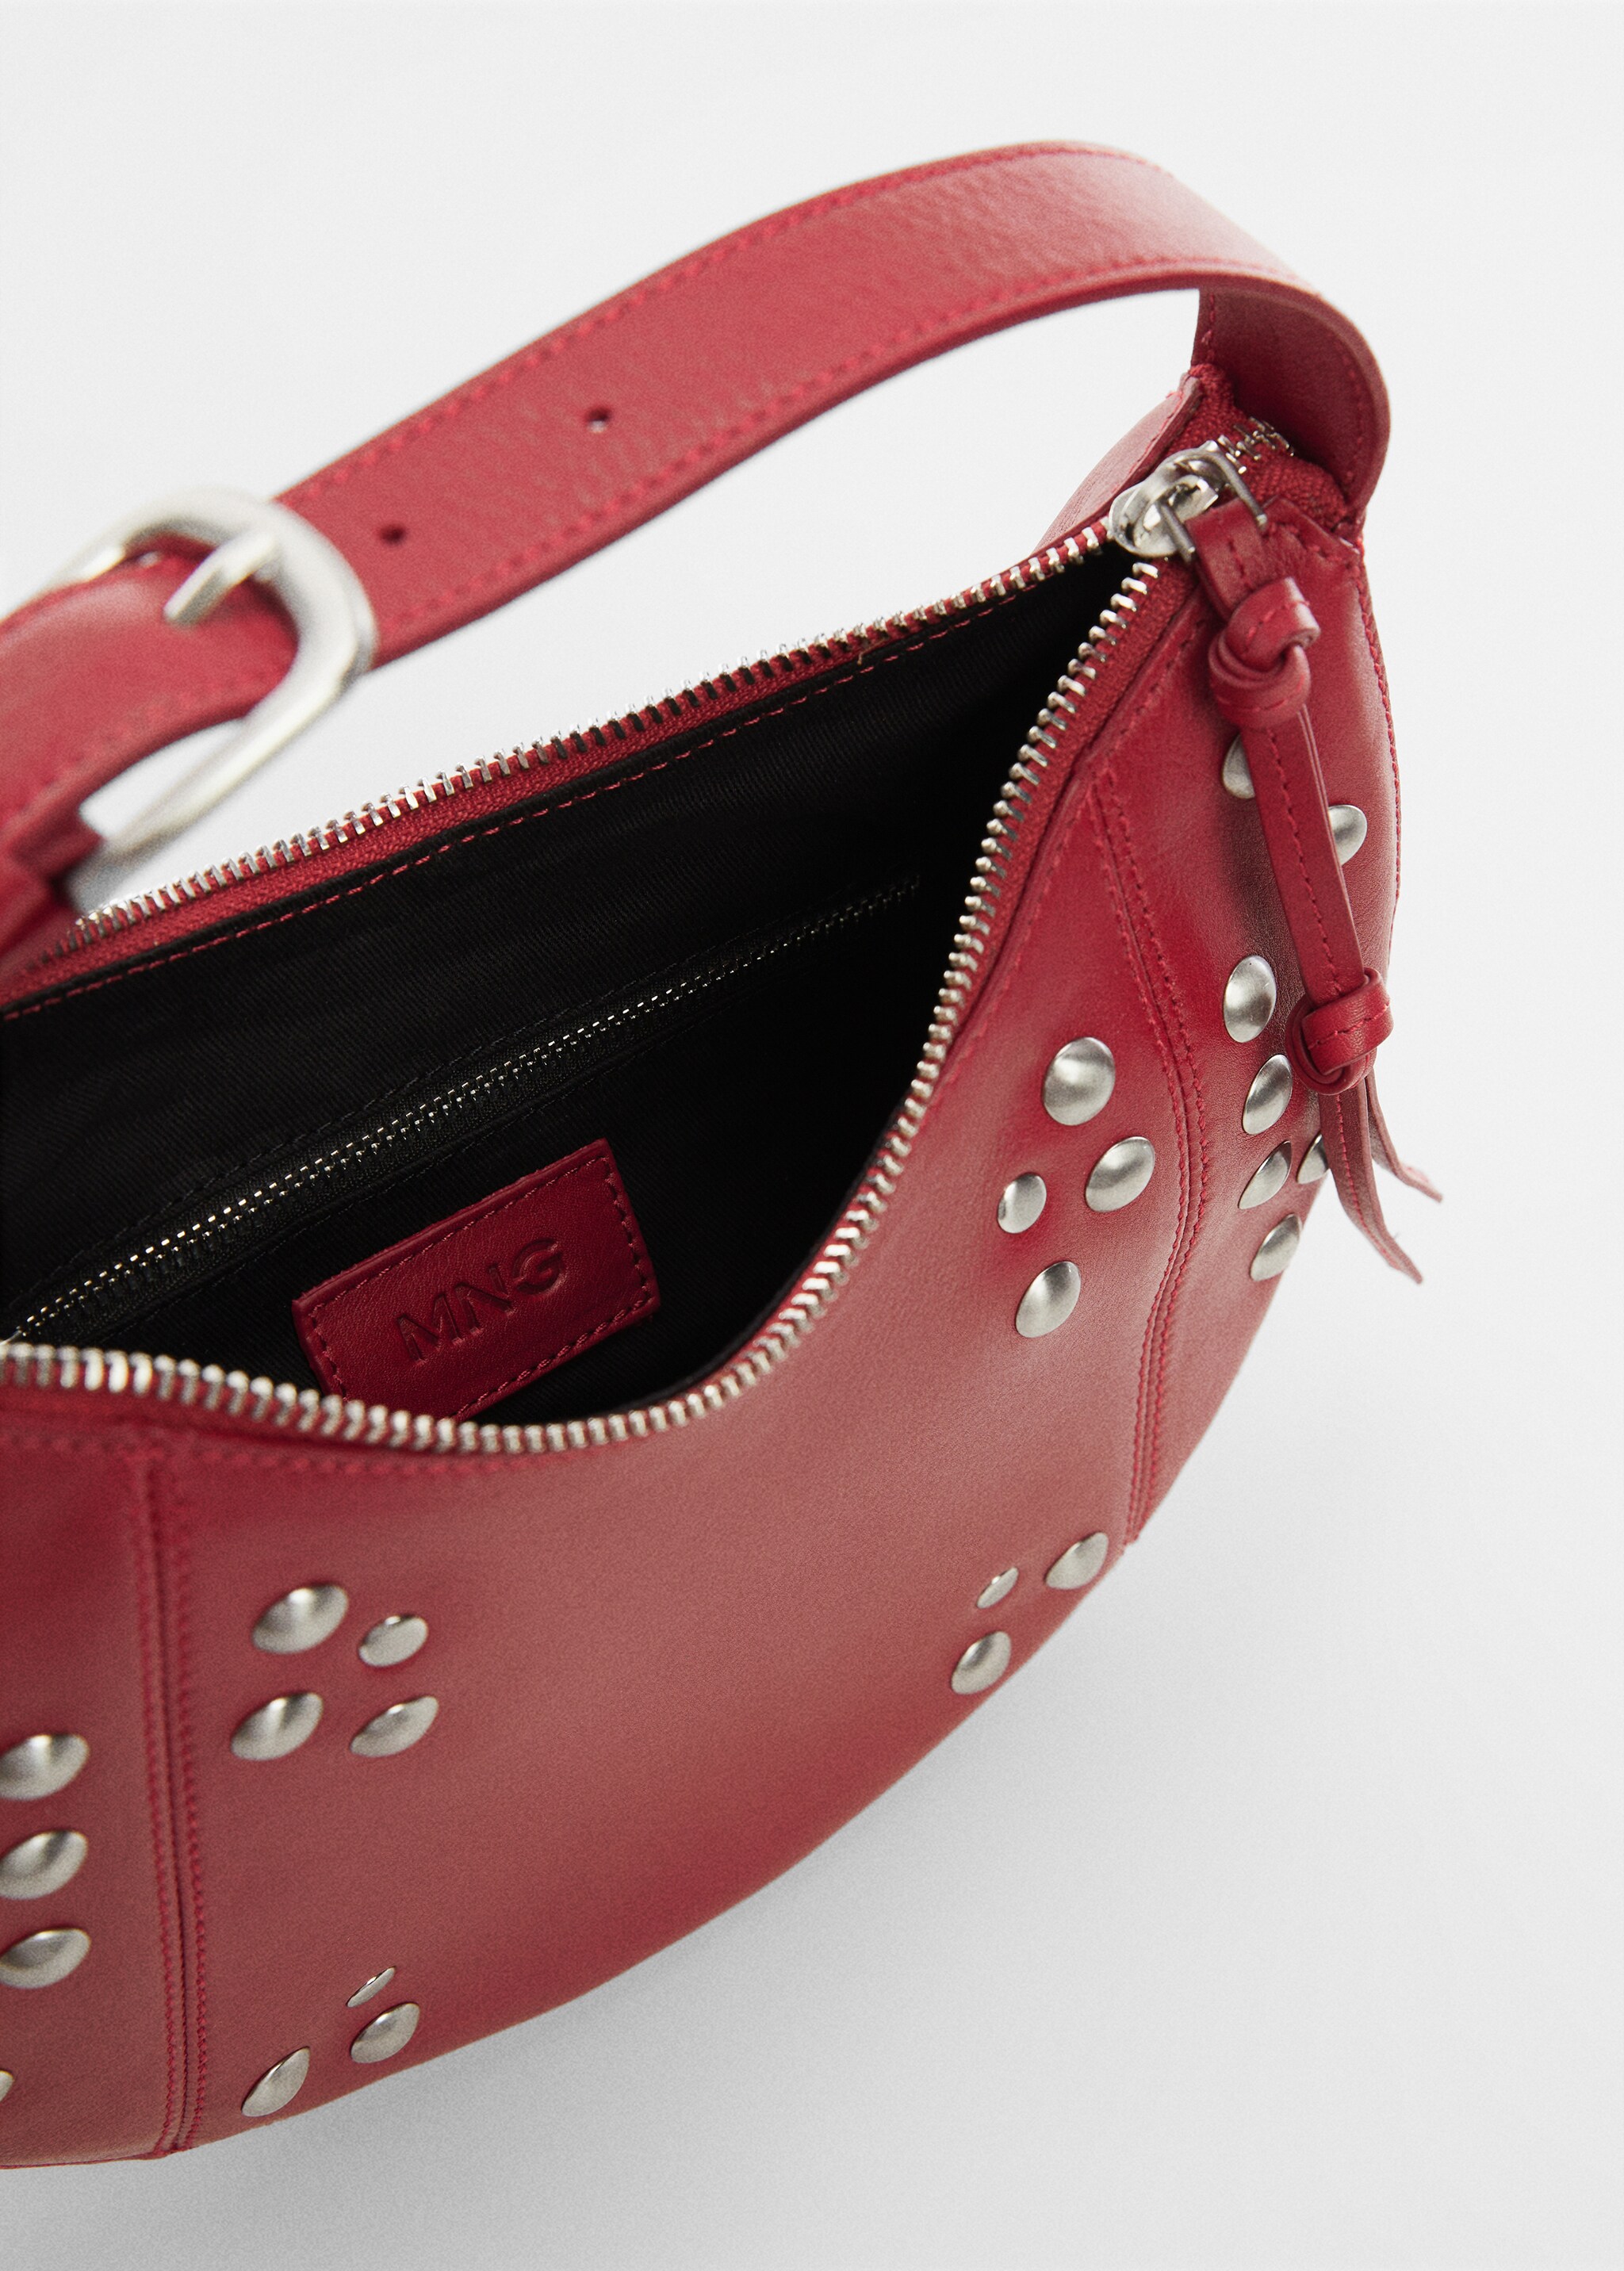 Stud leather bag - Details of the article 3